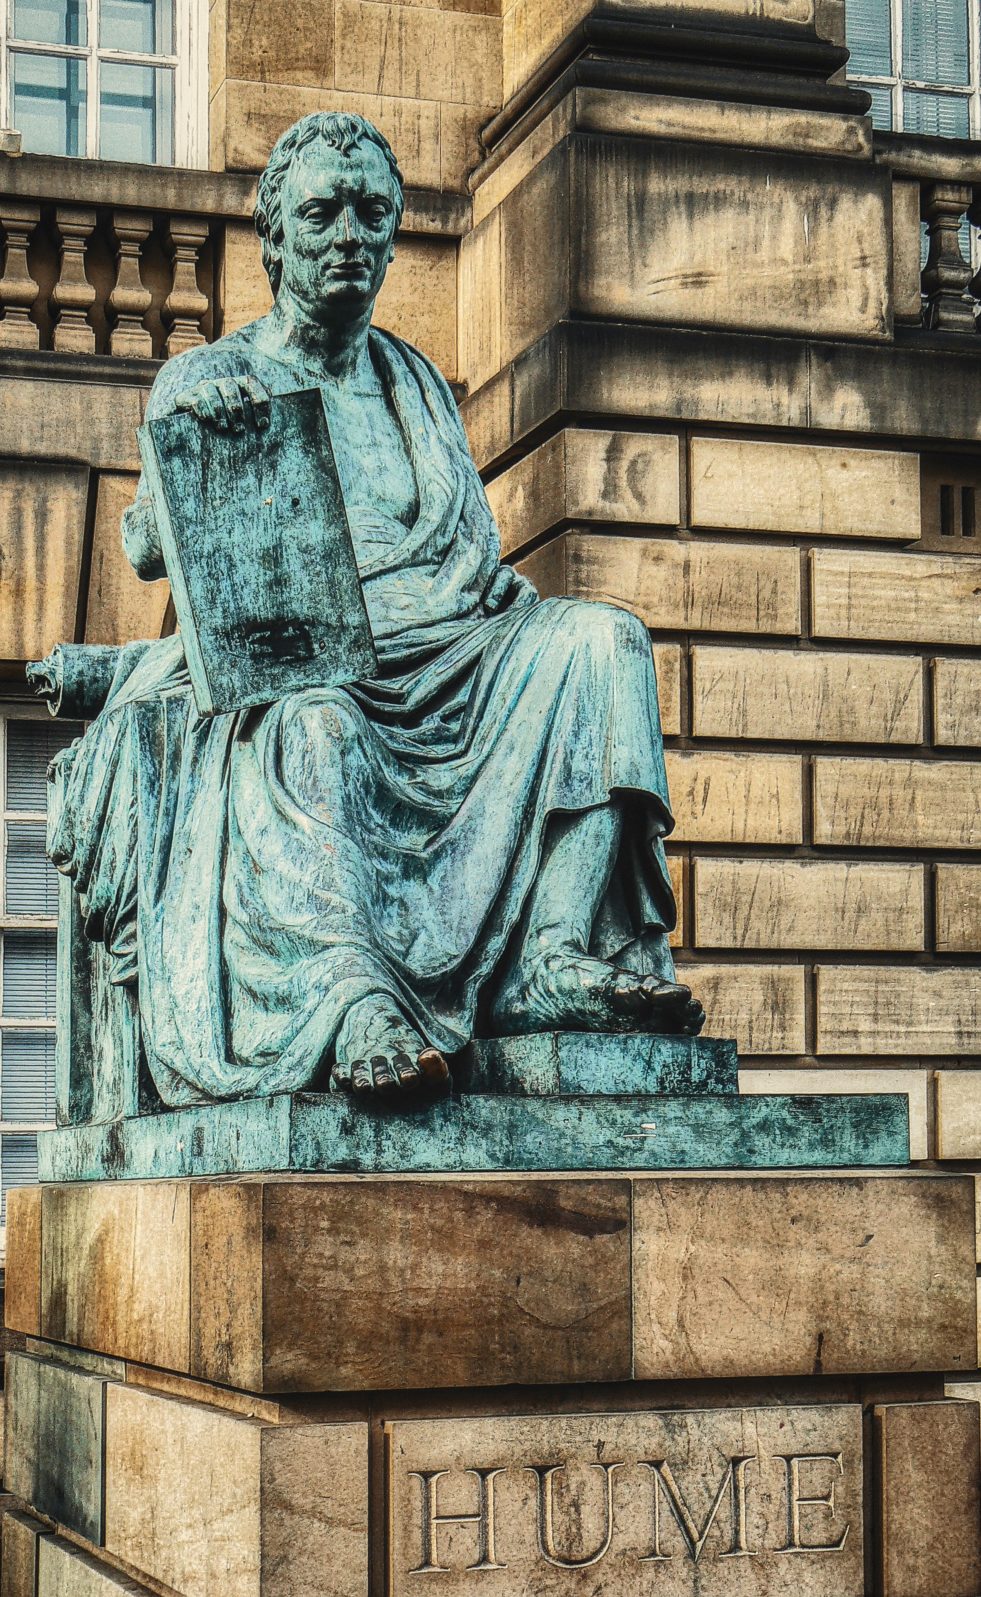 Statue of famed Scottish philosopher David Hume (1711-1776) who was instrumental in the development of modern science and psychology, as well as contemporary debates in philosophy of religion (Apr., 2010).